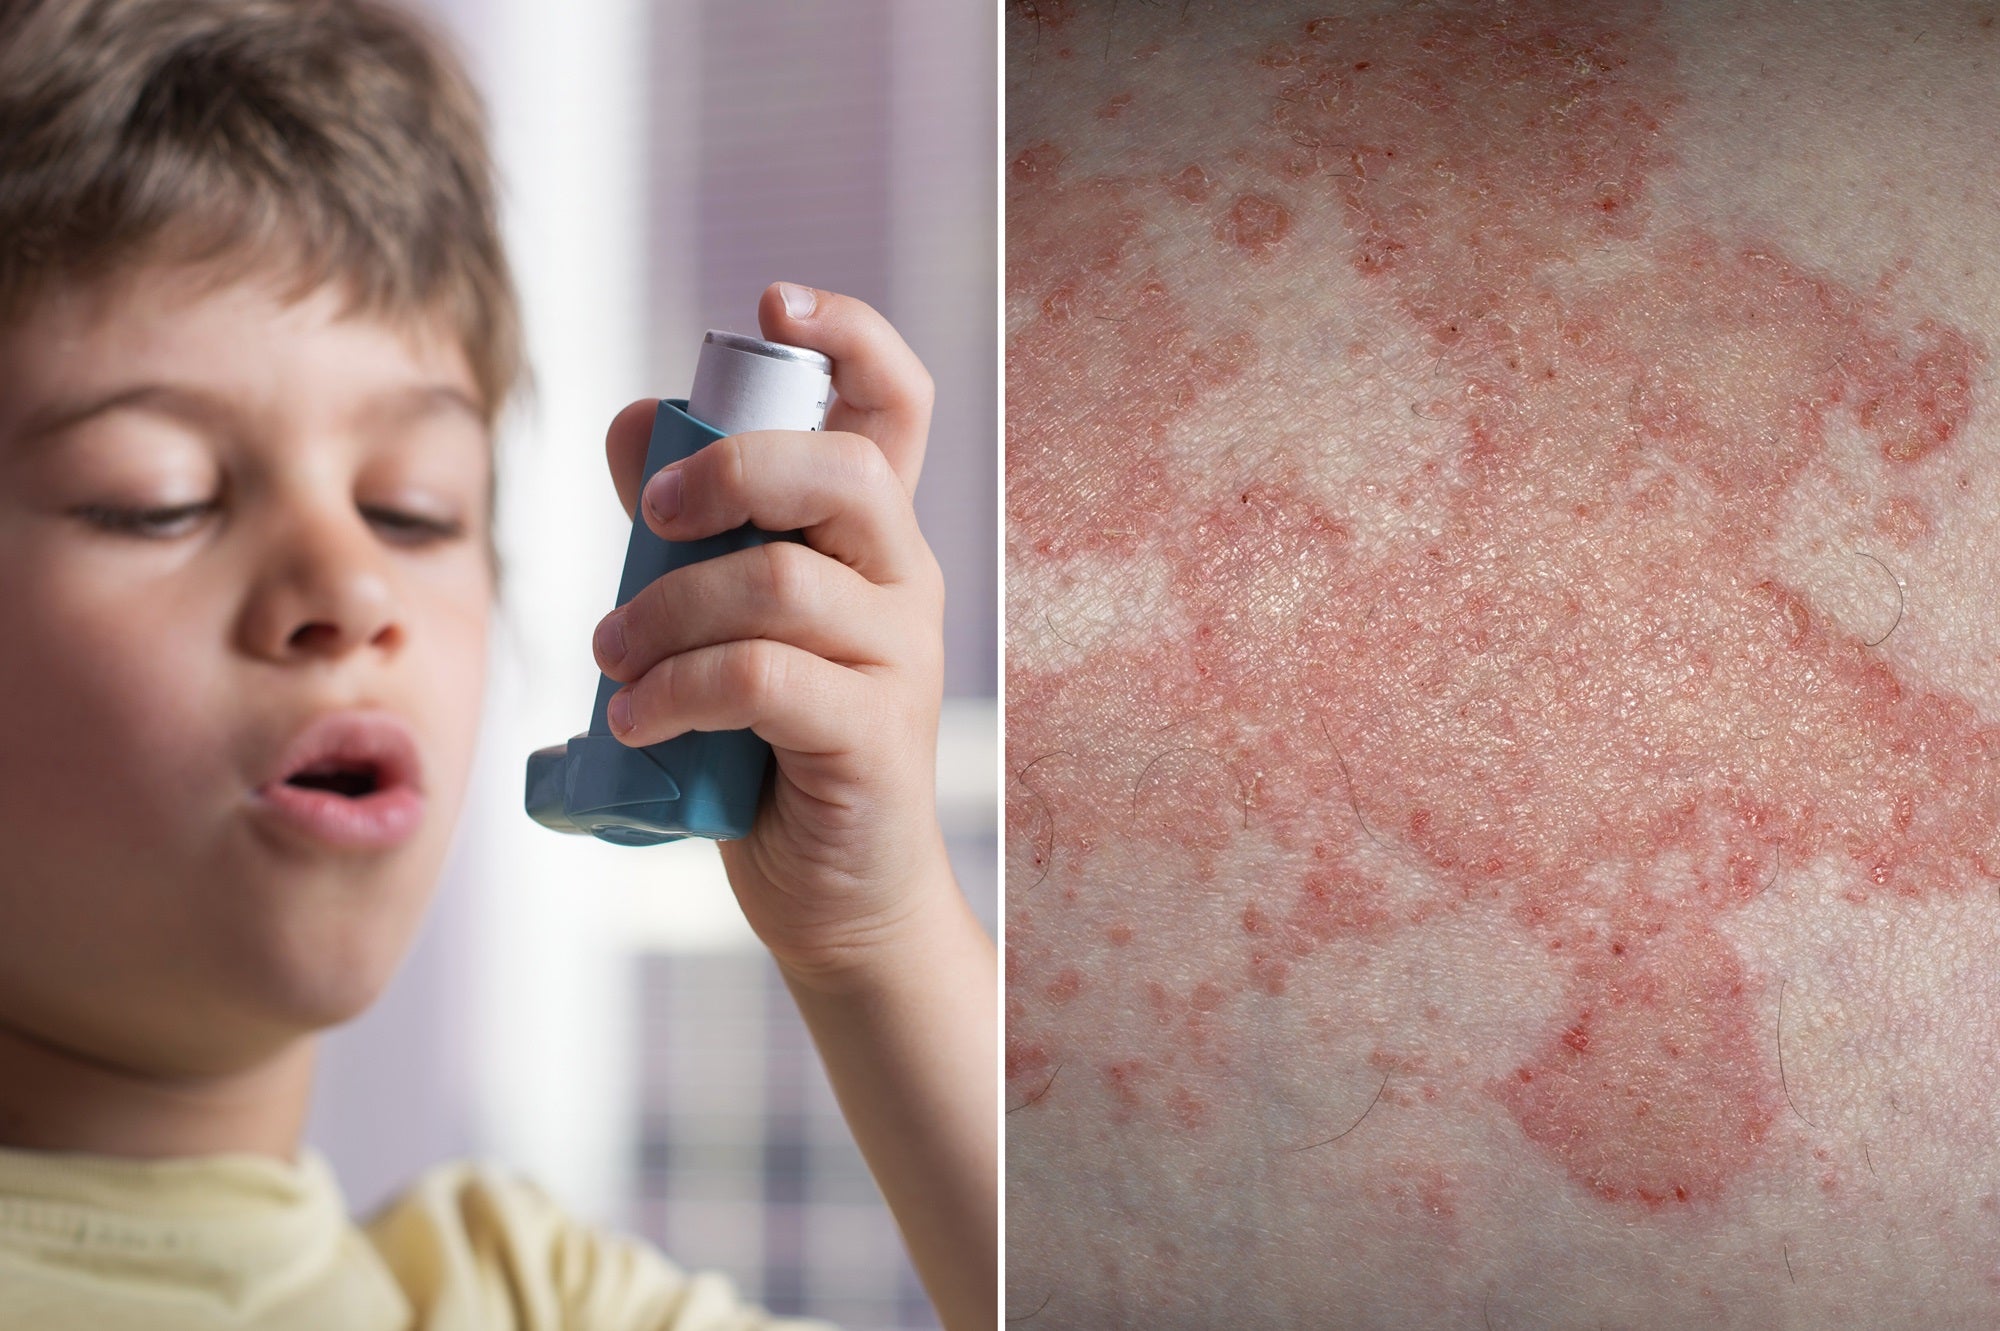 The link between Eczema and Asthma